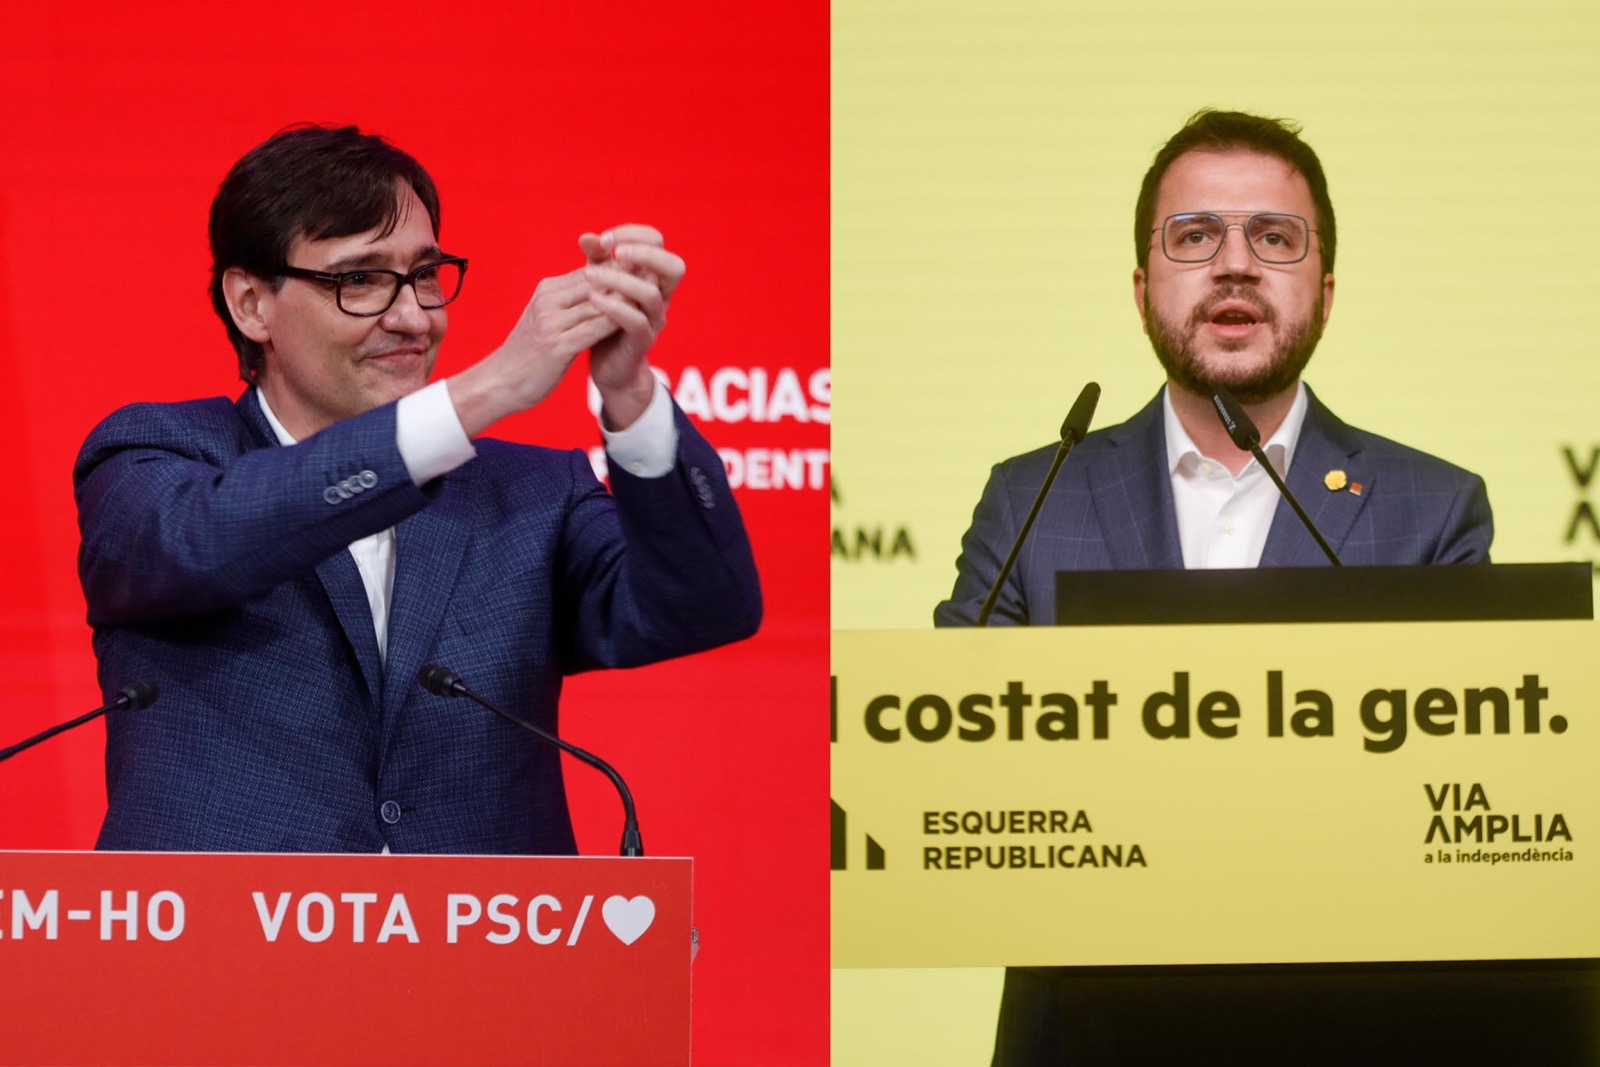 Salvador Illa (left) and Pere Aragonès (right), the presidential candidates of the Socialists and Esquerra